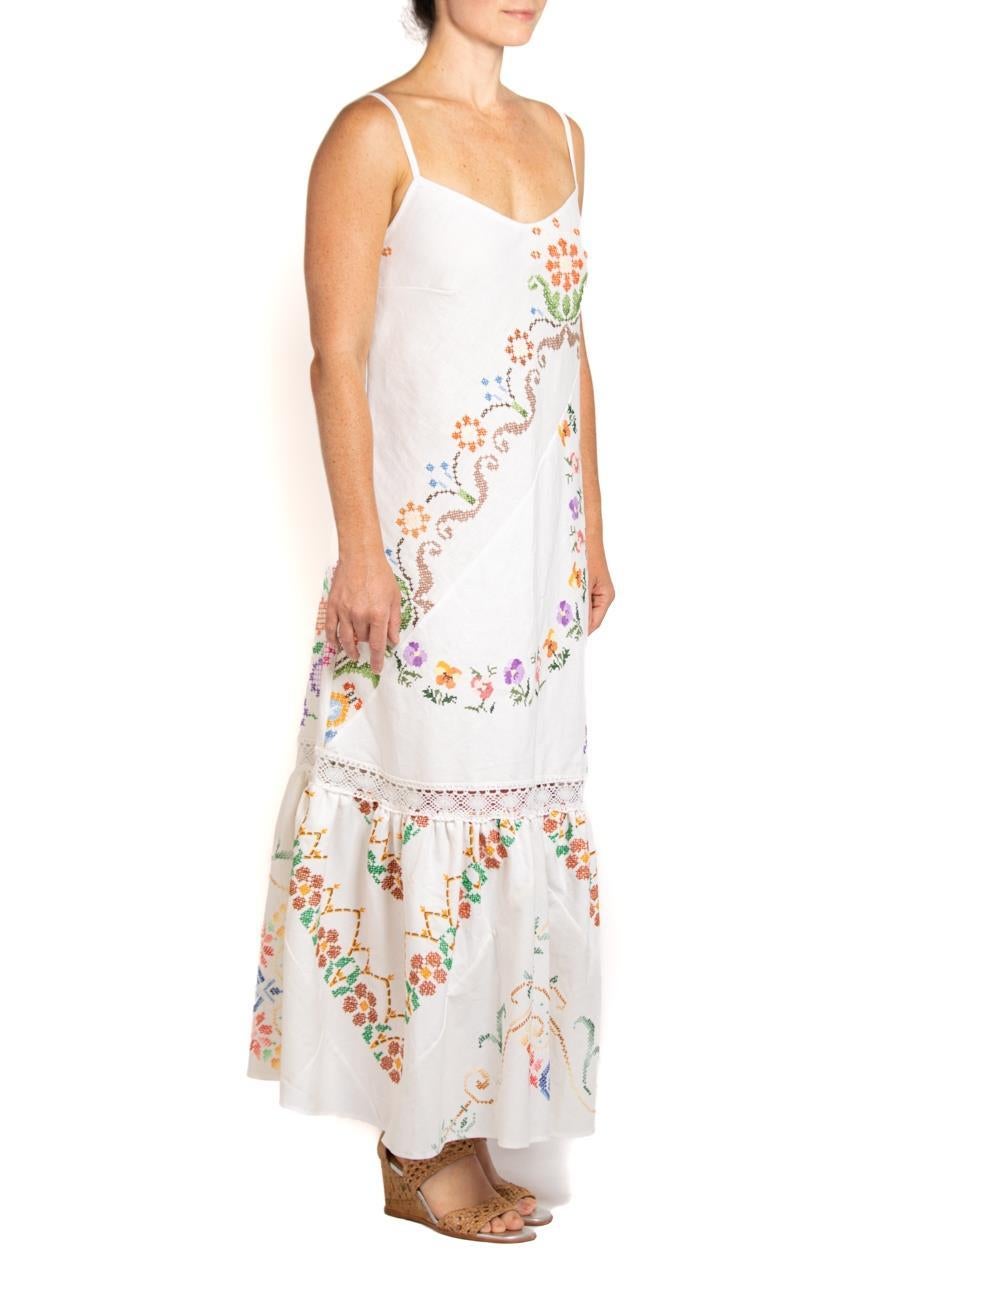 MORPHEW COLLECTION White & Floral Hand Embroidered Fabric From France Dress For Sale 1